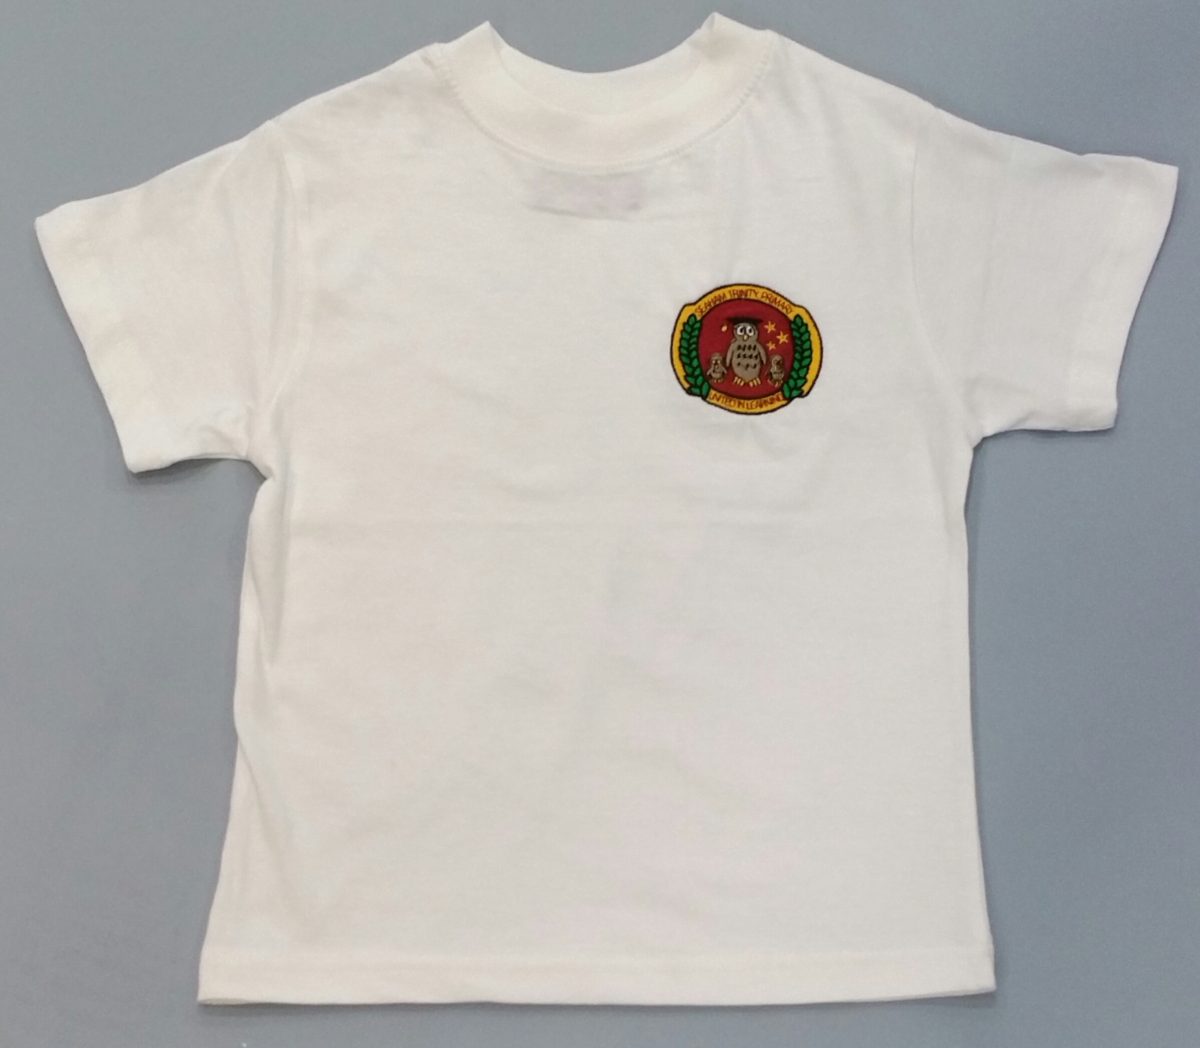 WHITE P.E. T-SHIRT with embroidered school logo